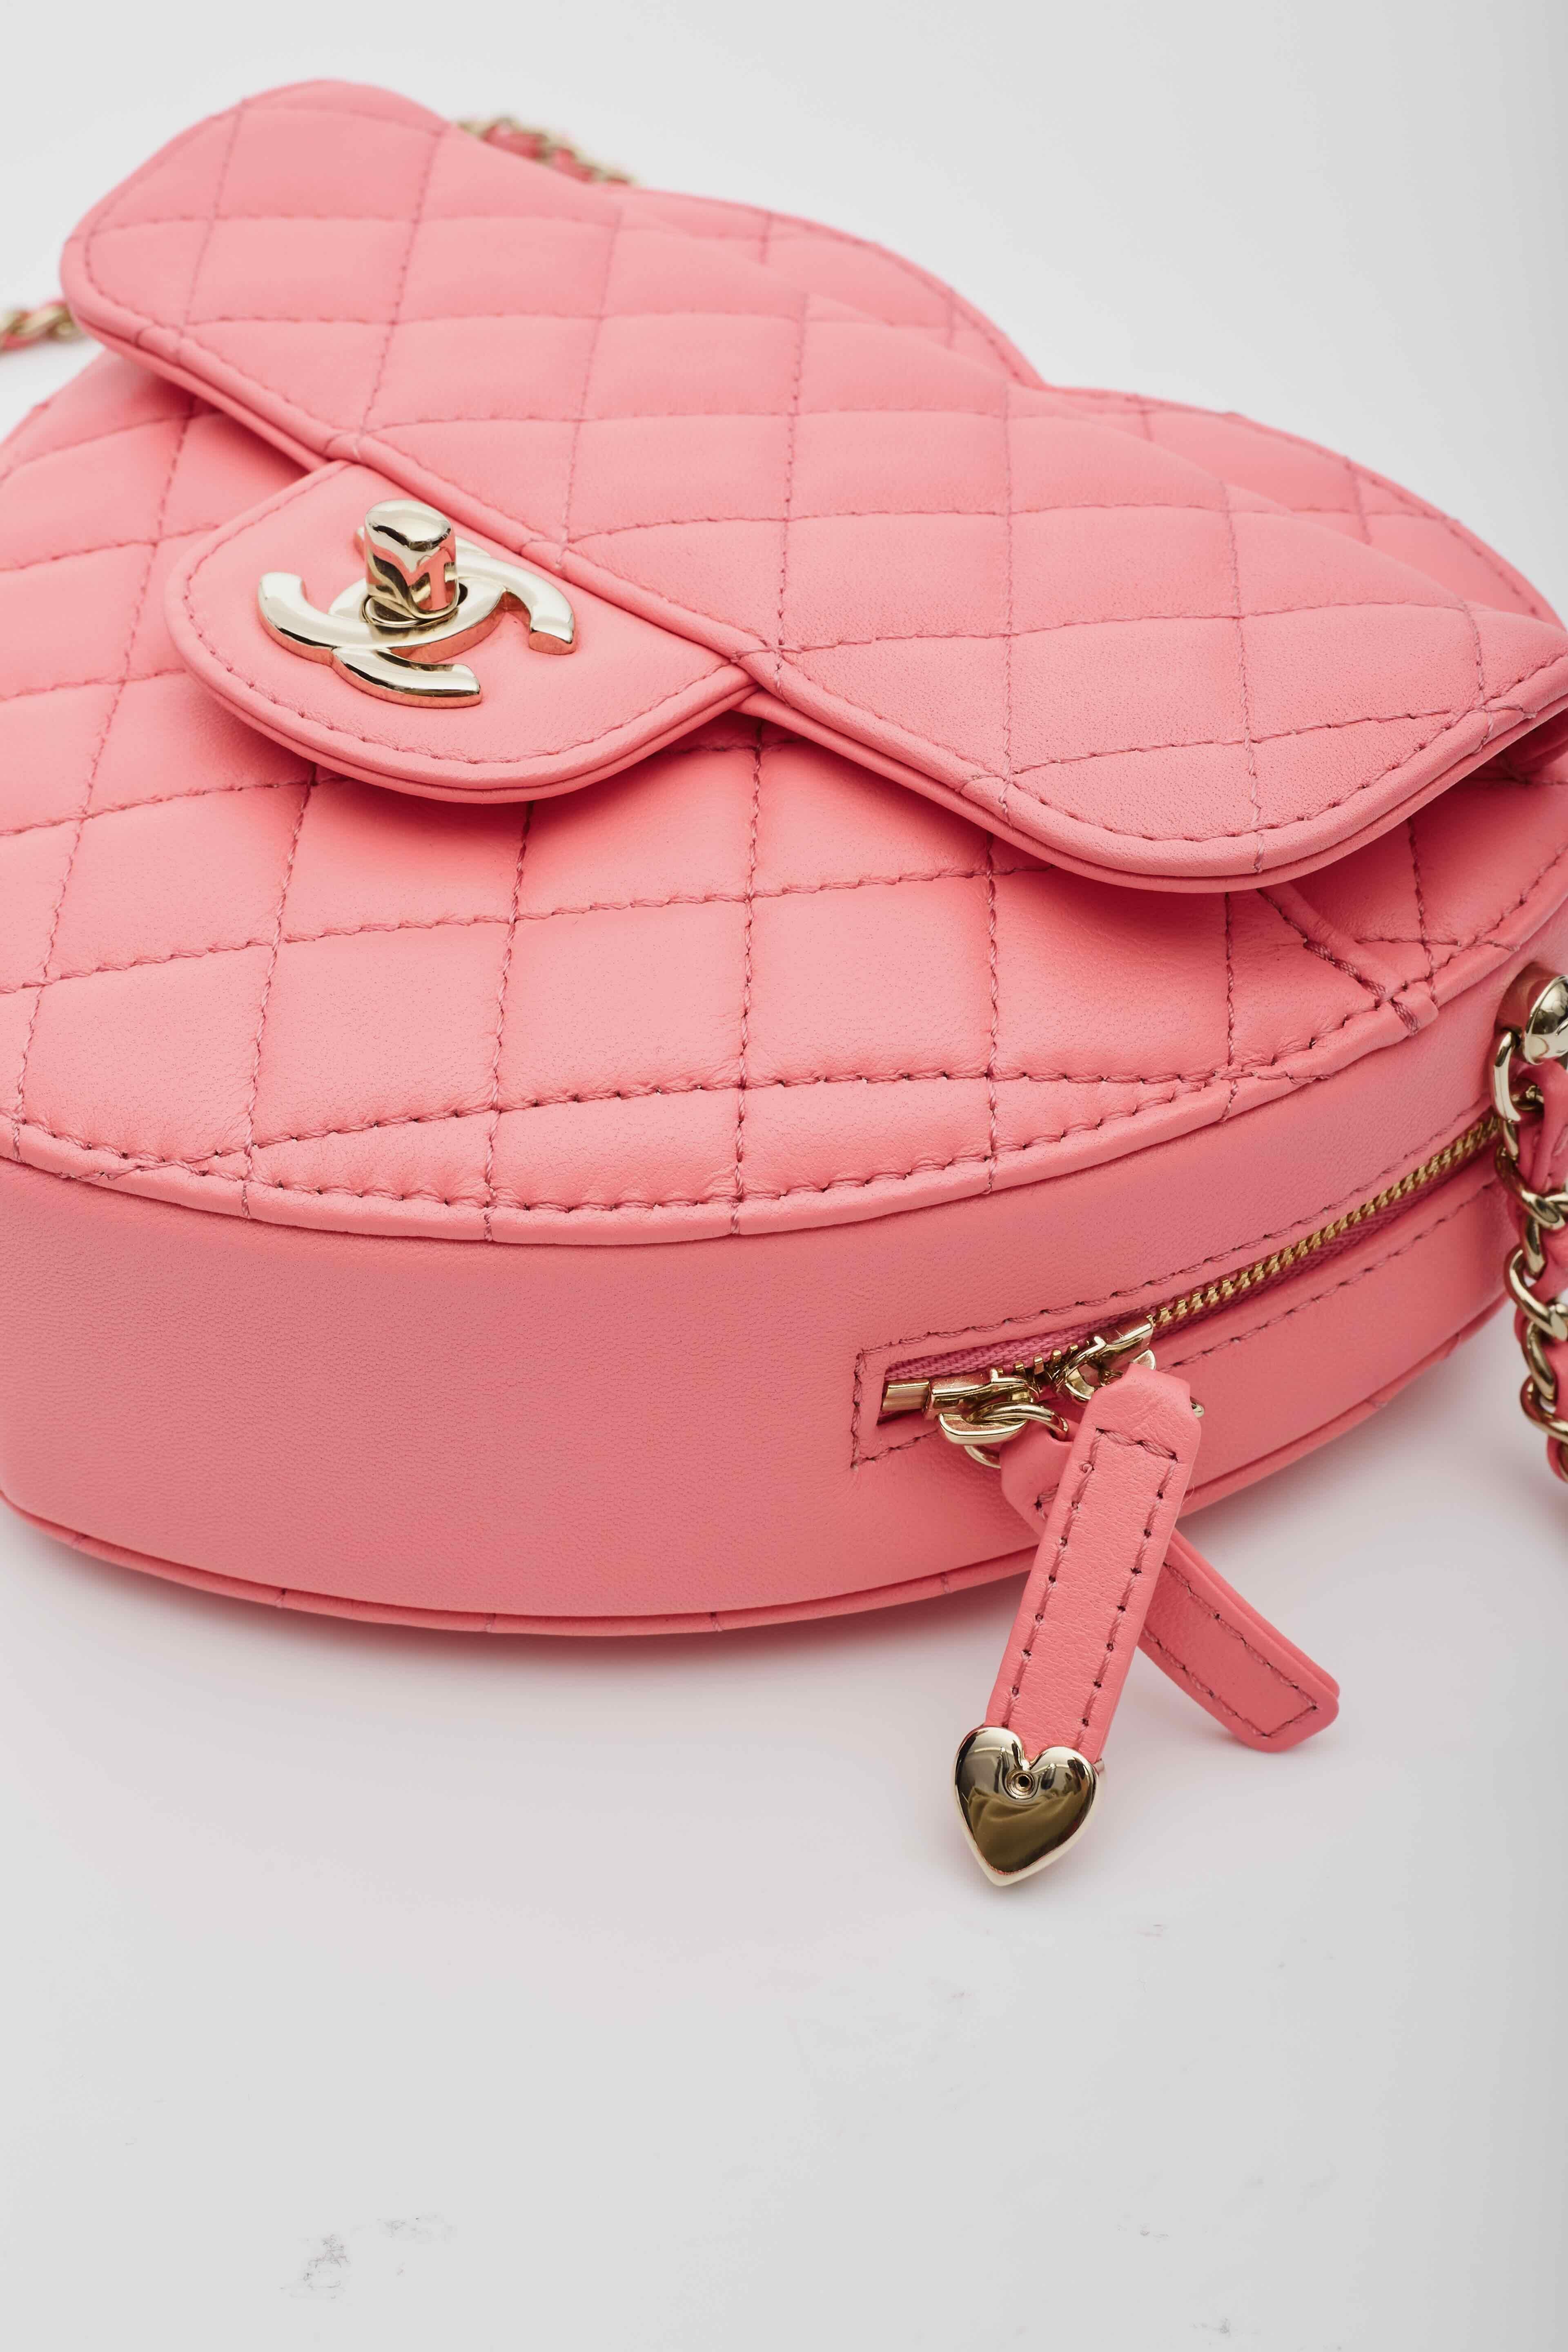 Chanel Lambskin Quilted CC In Love Heart Shoulder Bag Pink In Excellent Condition In Montreal, Quebec